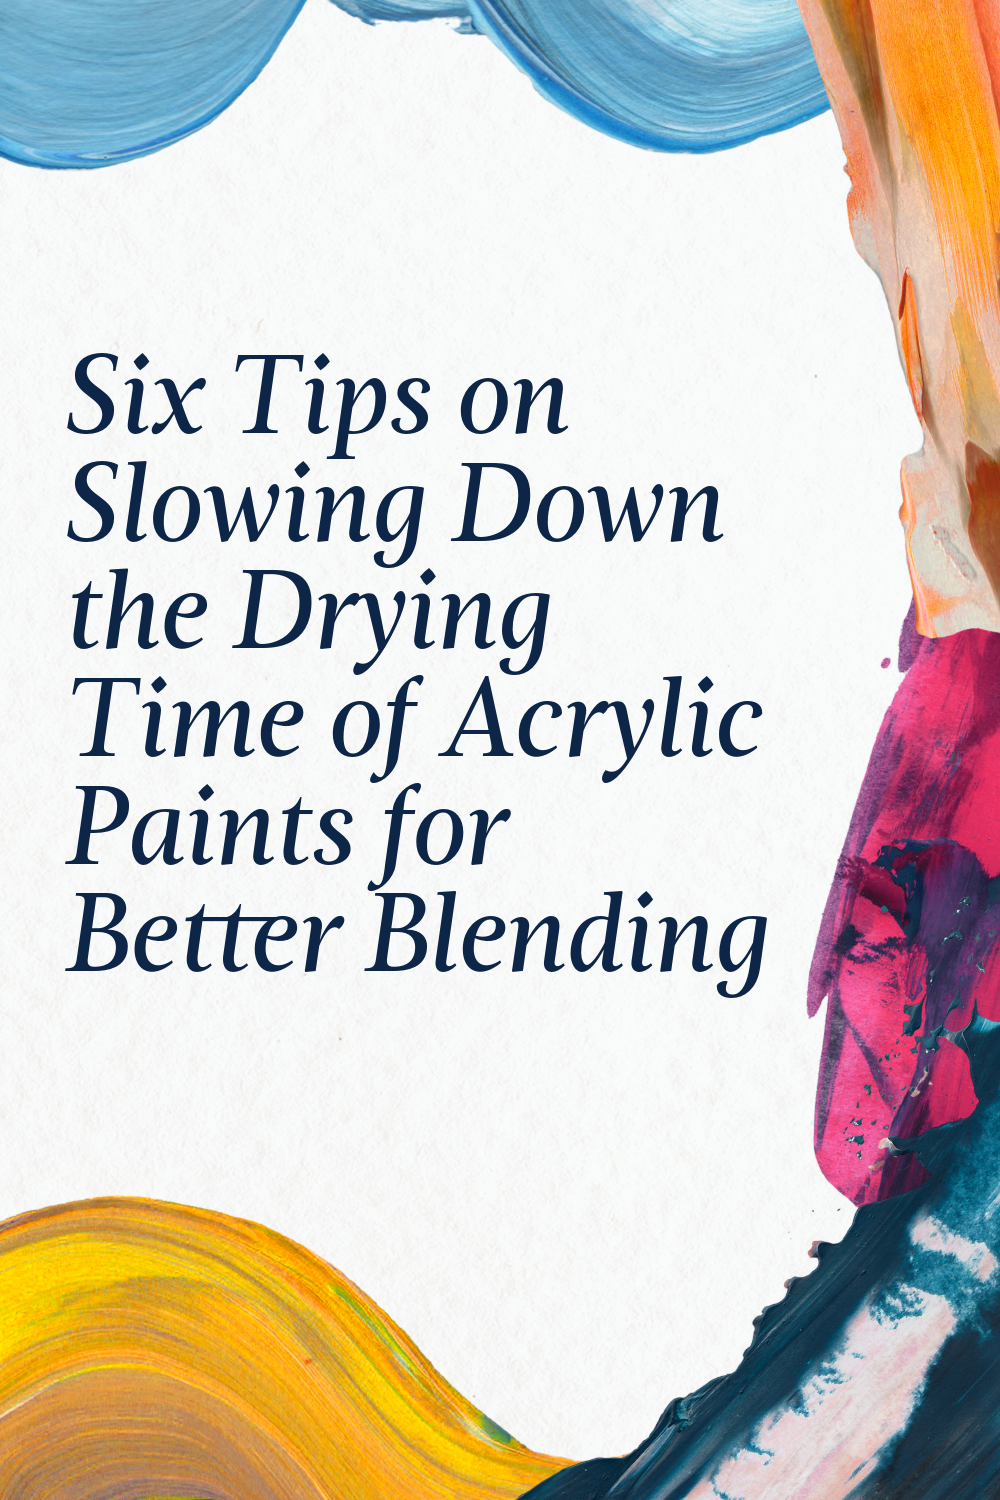 You are currently viewing Six Tips on Slowing Down the Drying Time of Acrylic Paints for Better Blending